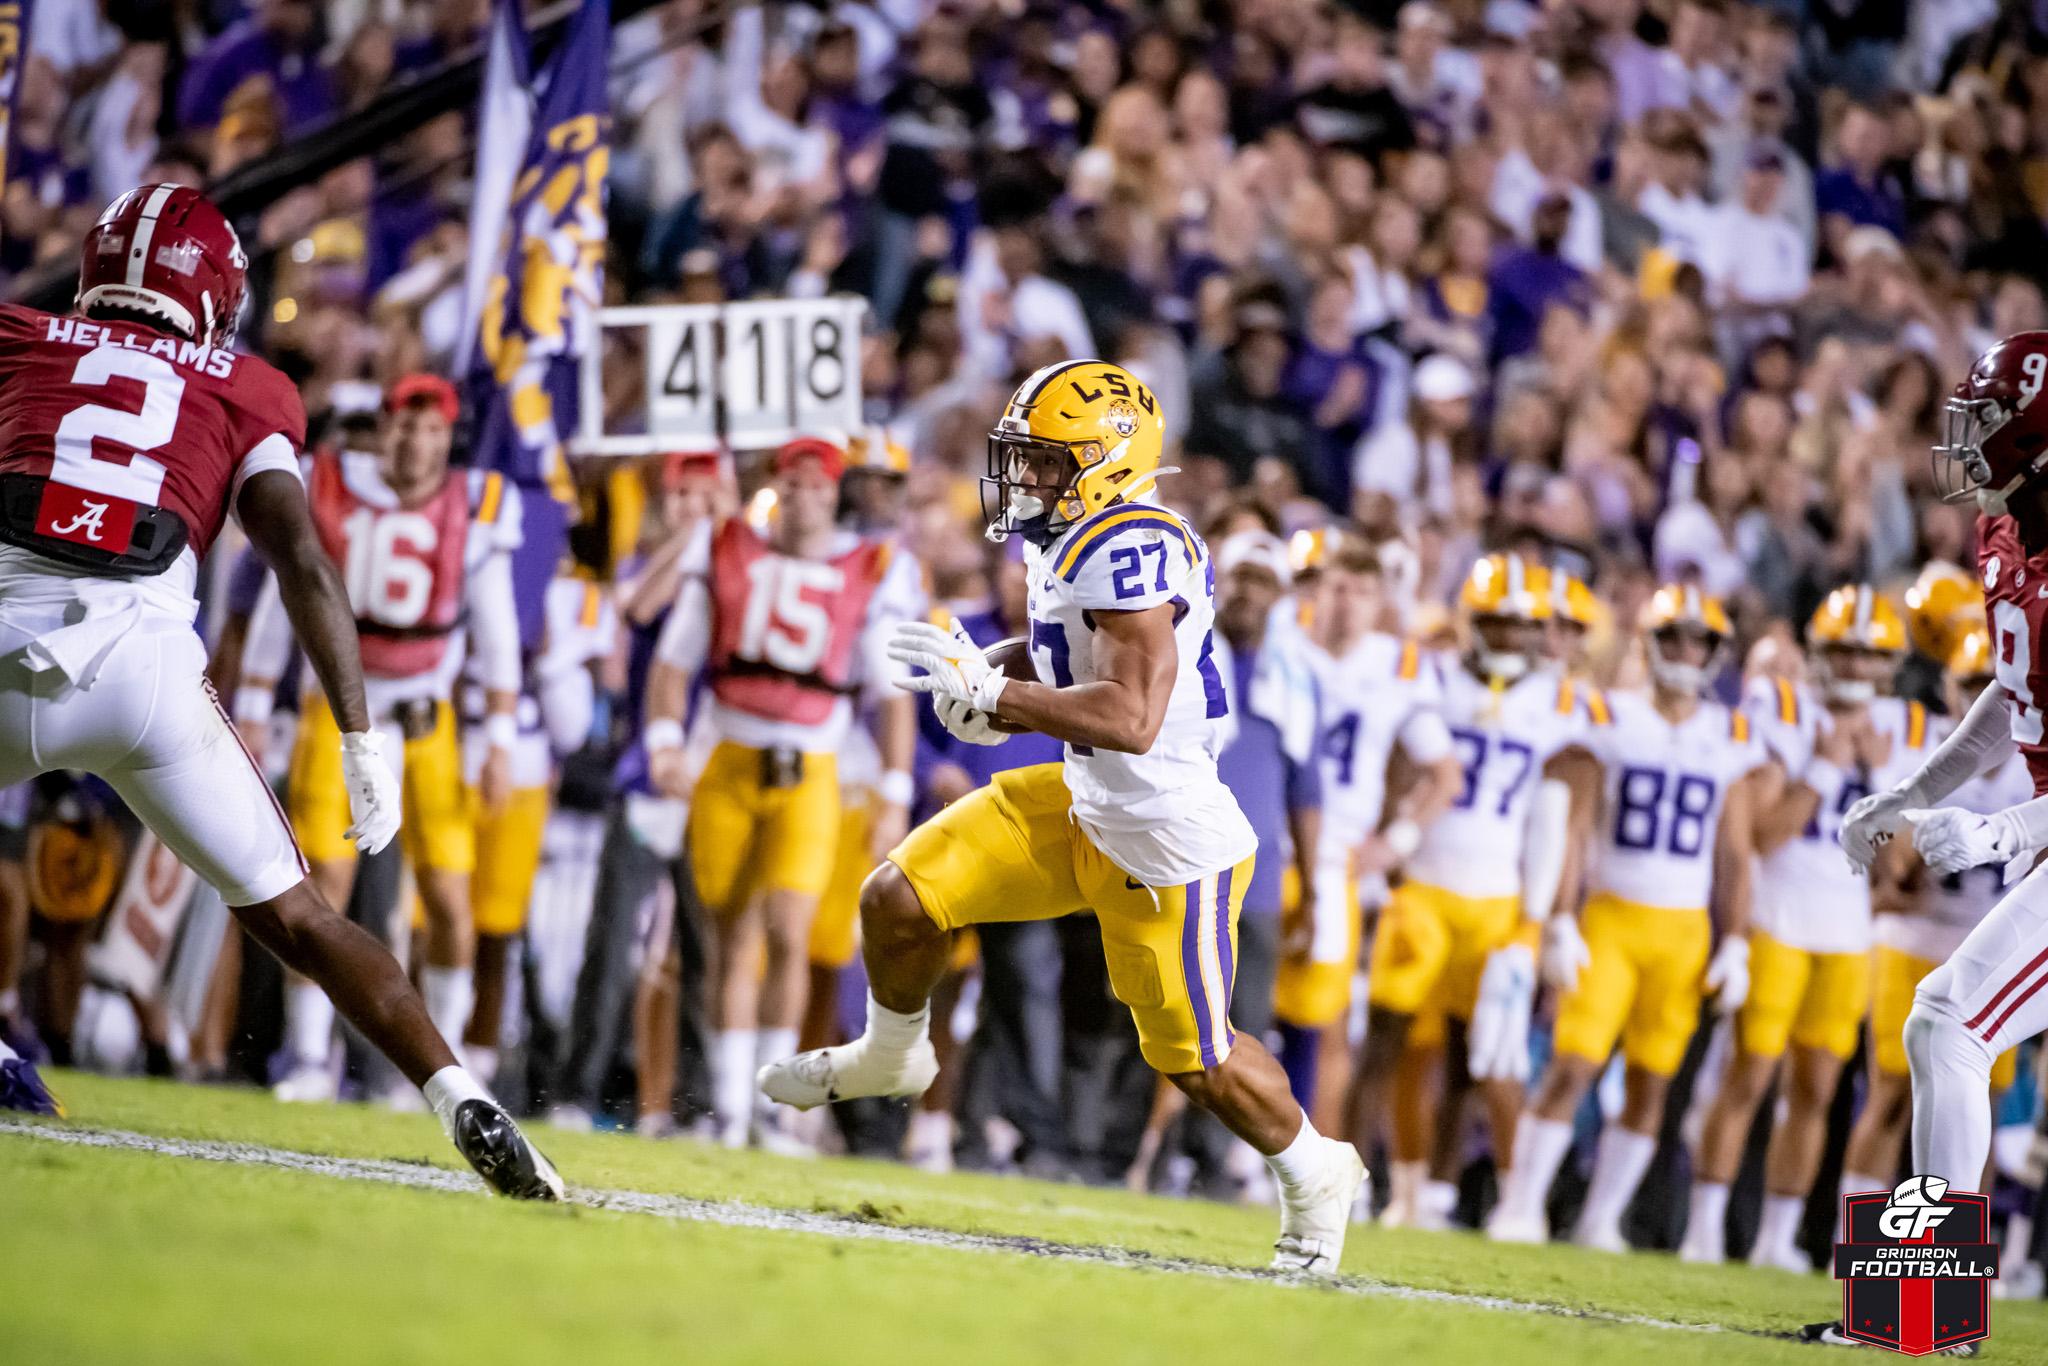 Josh Williams Reflects on Football Journey from Walk-On to Representing LSU for SEC Media Days